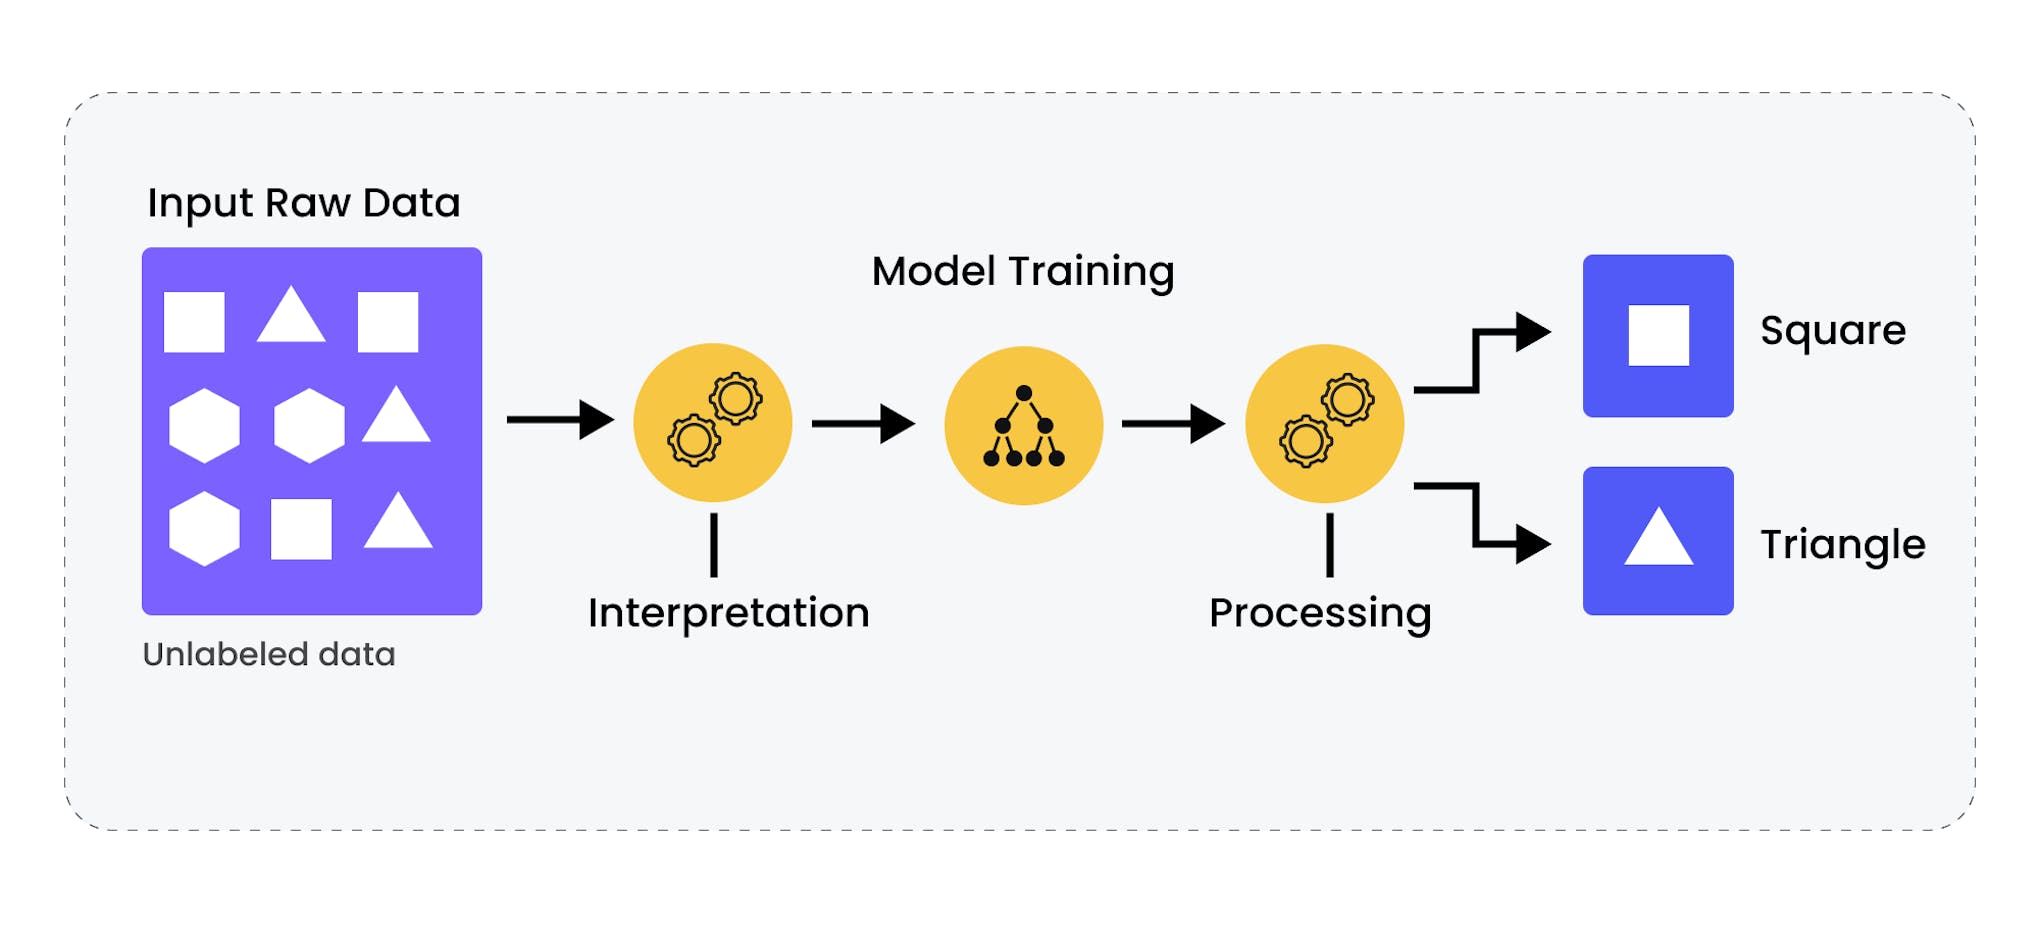 How does unsupervised learning work?